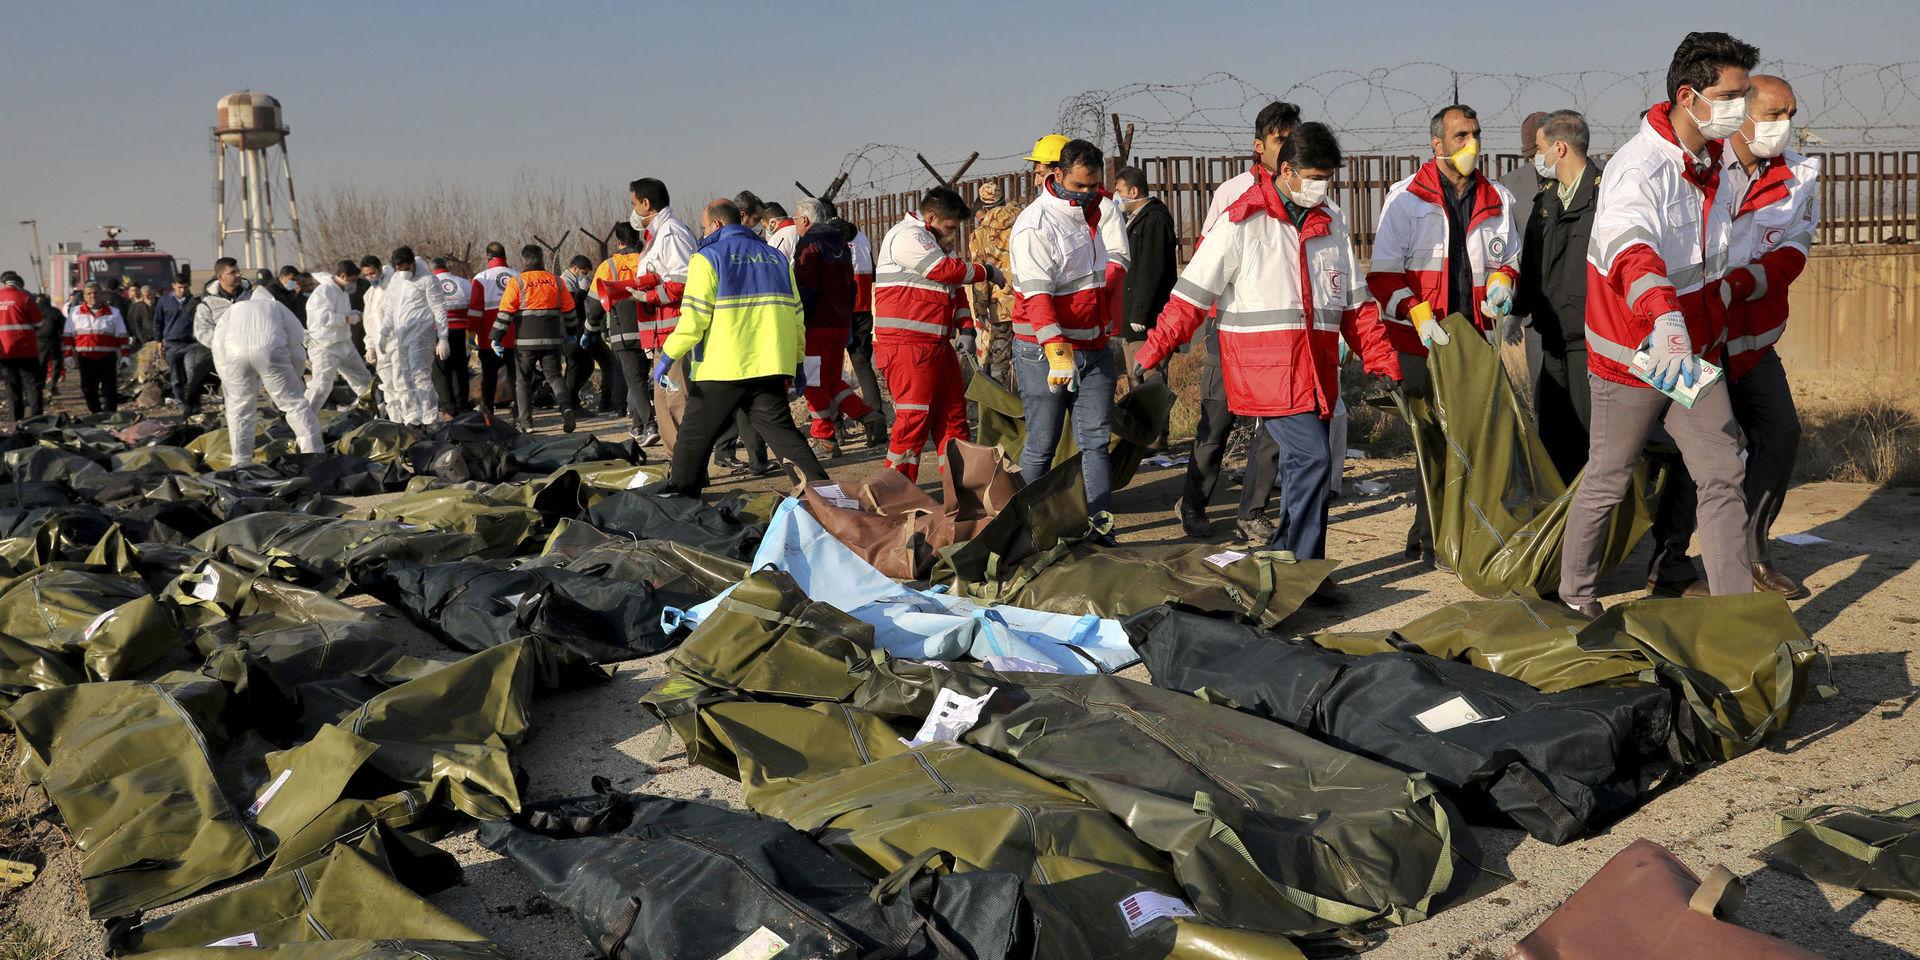 Rescue workers recover bidiesof victims at the scene where a Ukrainian plane crashed in Shahedshahr, southwest of the capital Tehran, Iran, Wednesday, Jan. 8, 2020. A Ukrainian airplane with more than 170 people crashed on Wednesday shortly after takeoff from Tehran&apos;s main airport, killing all onboard. (AP Photo/Ebrahim Noroozi)  ENO122